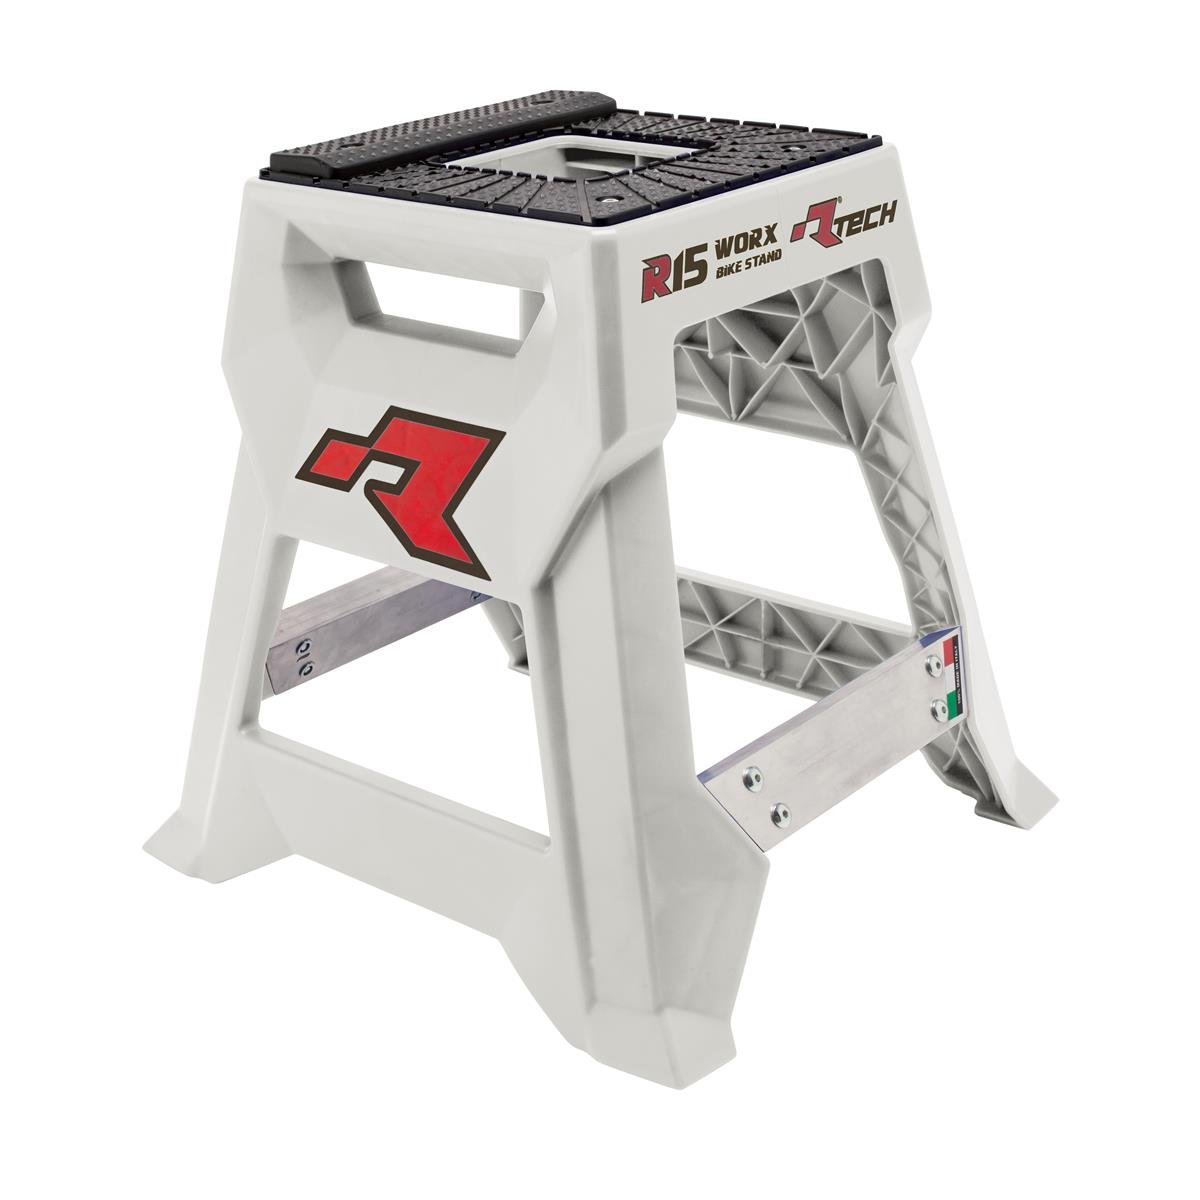 RTECH Motocross Stand R15 White